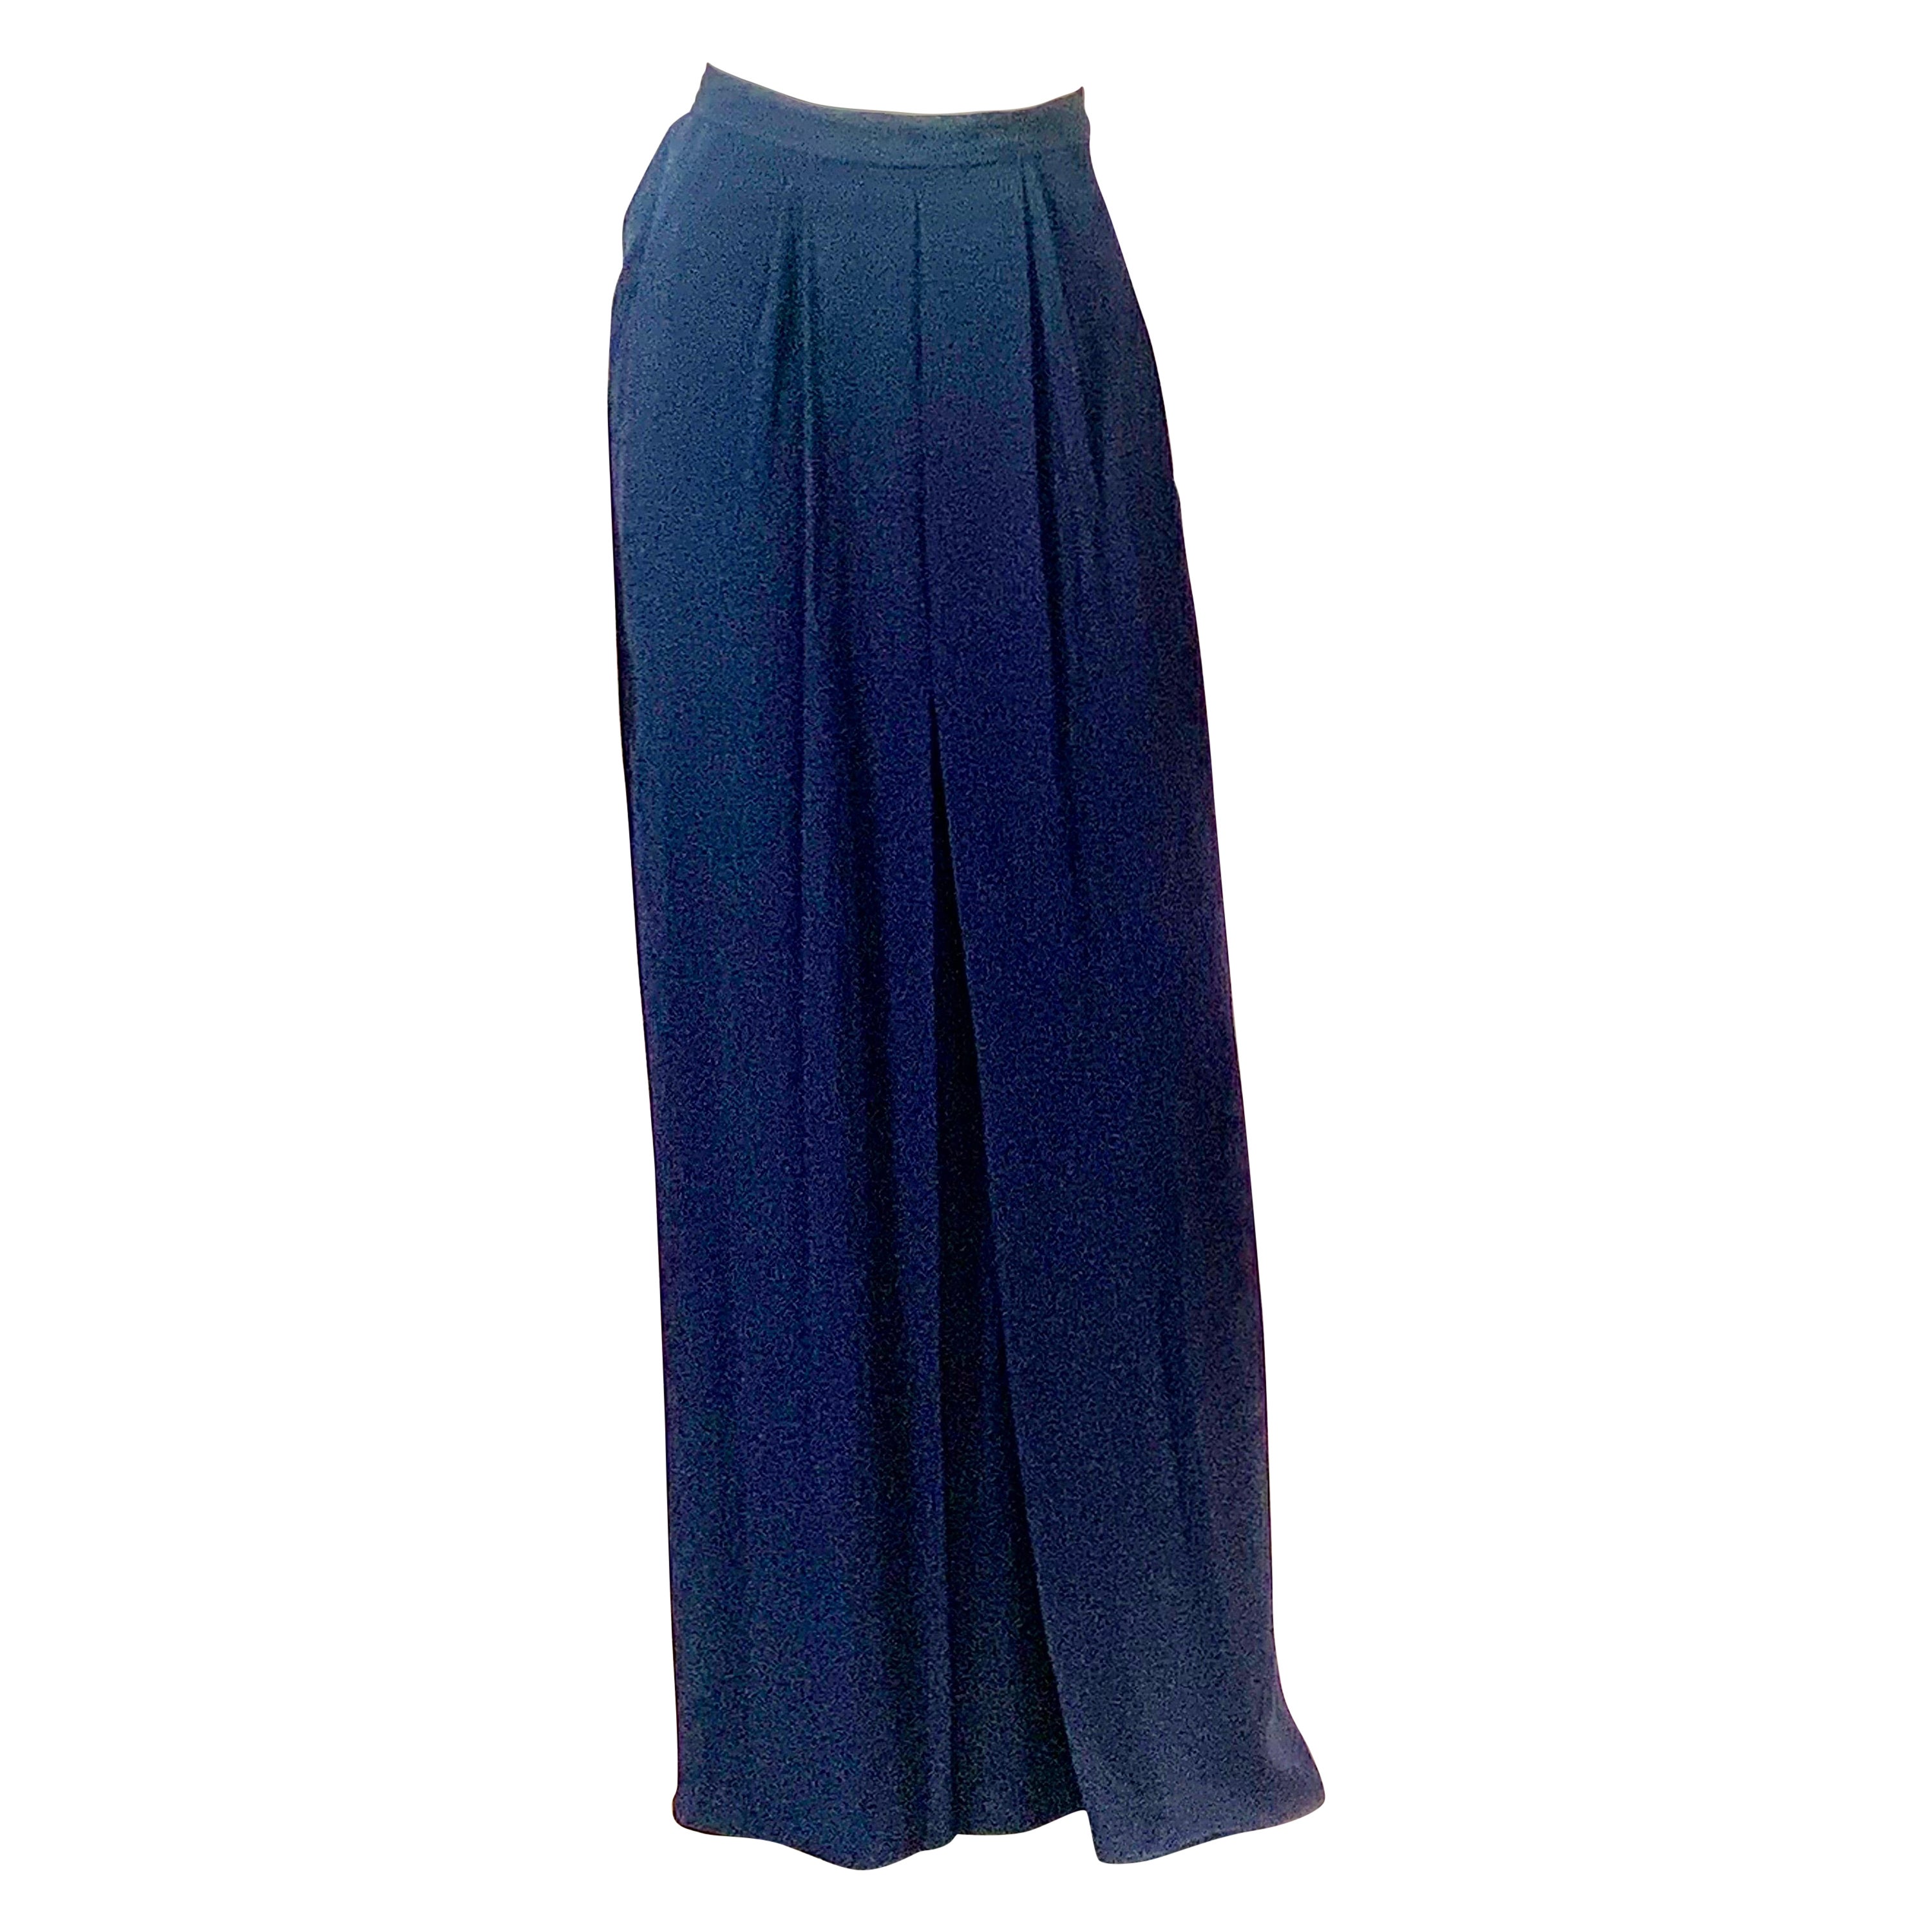 Yves Saint Laurent Navy Blue Long Skirt with Original Tags Never Worn For Sale